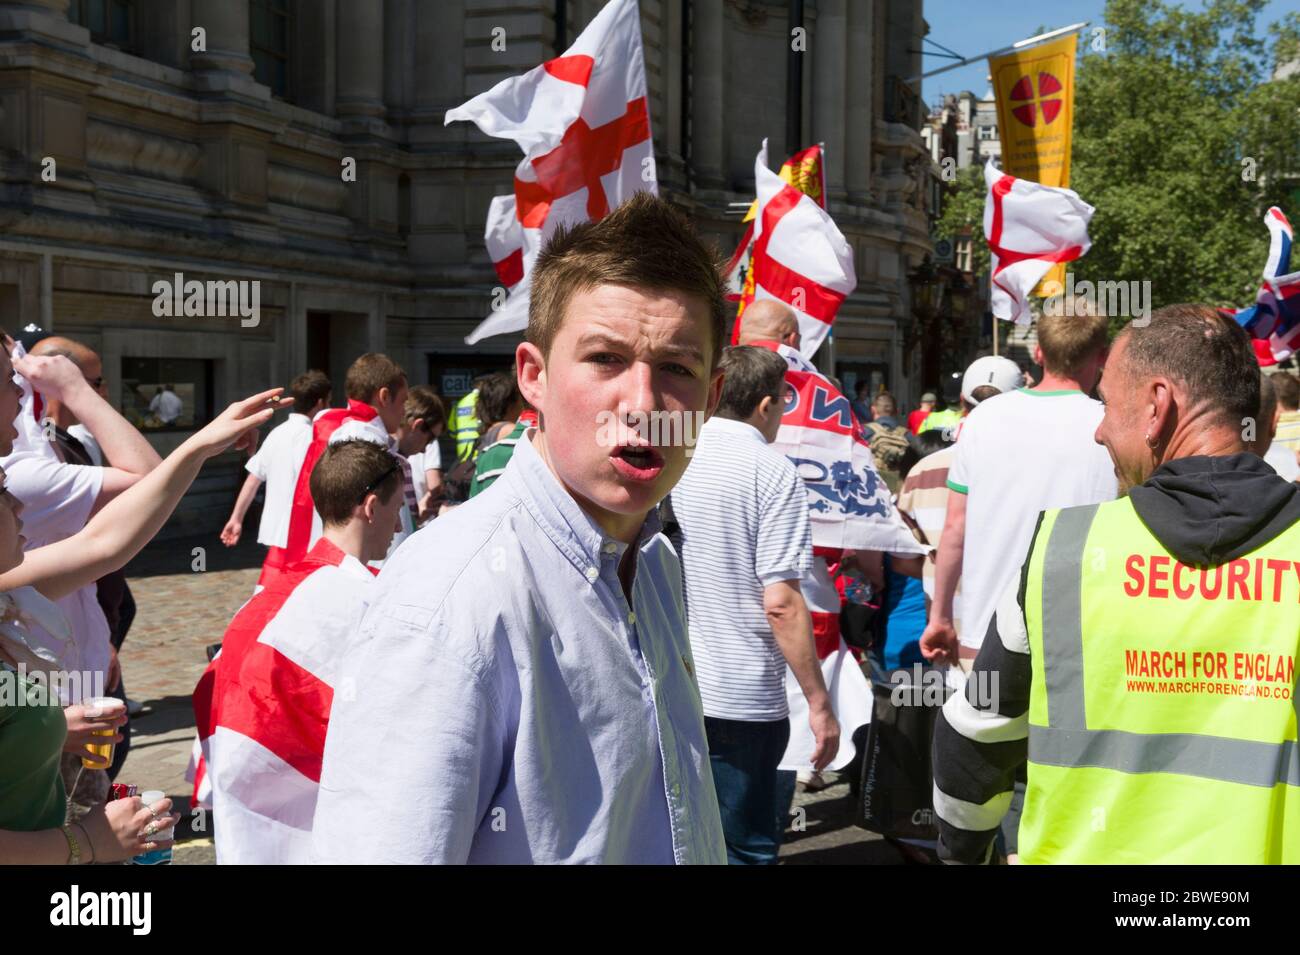 English Defence League (EDL) members on a March organised by group calling itself 'British Citizens Against Muslim Extremists'. The protest is about t Stock Photo